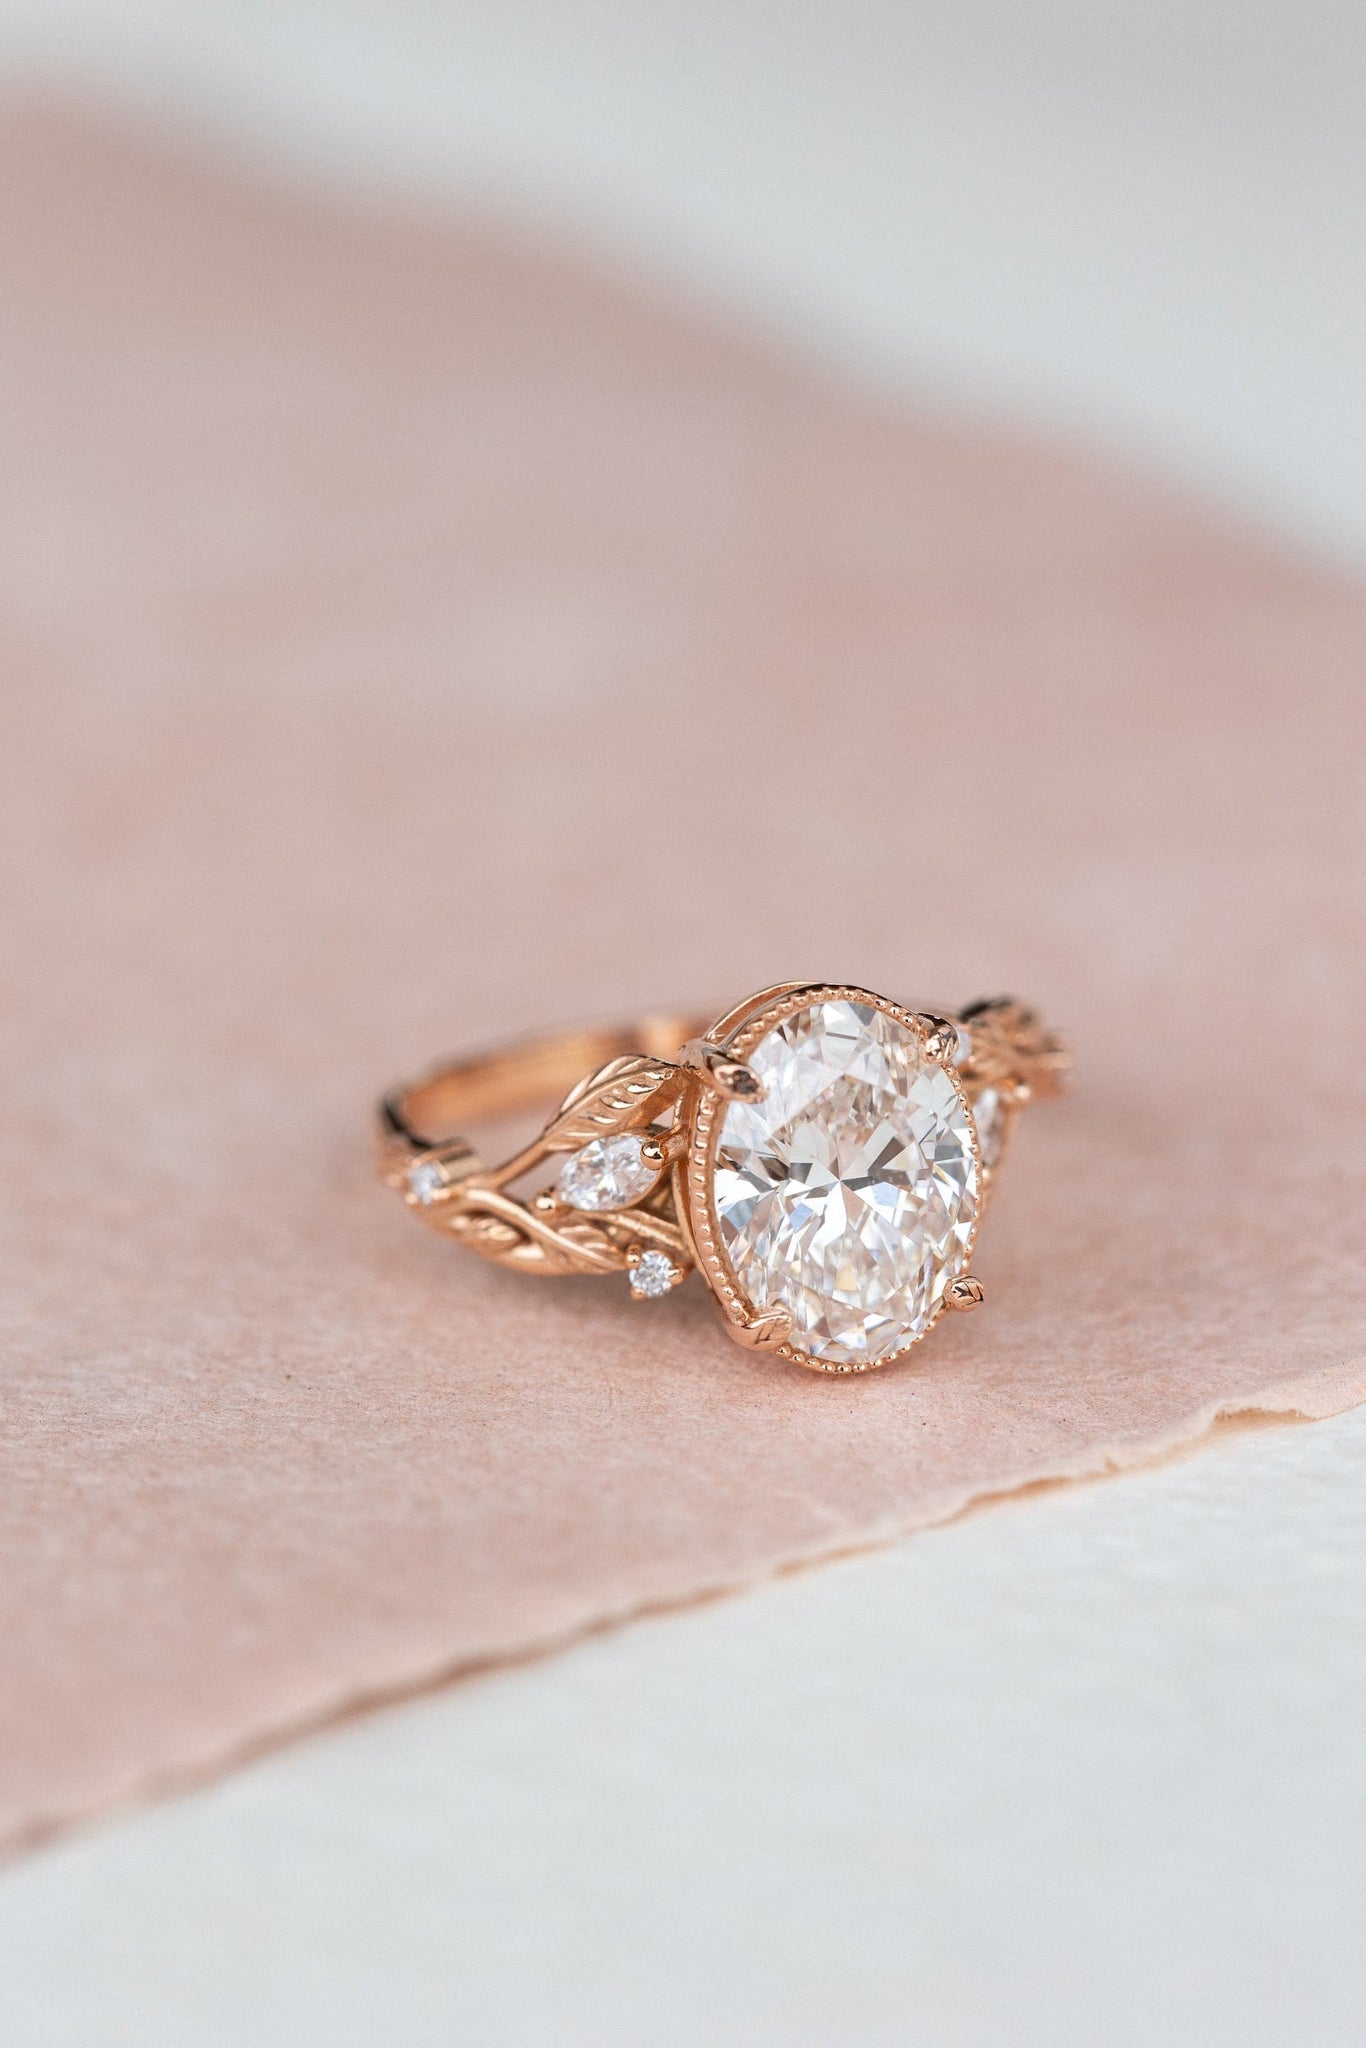 Oval lab grown diamond engagement ring, rose gold leaves and vines ring / Patricia - Eden Garden Jewelry™